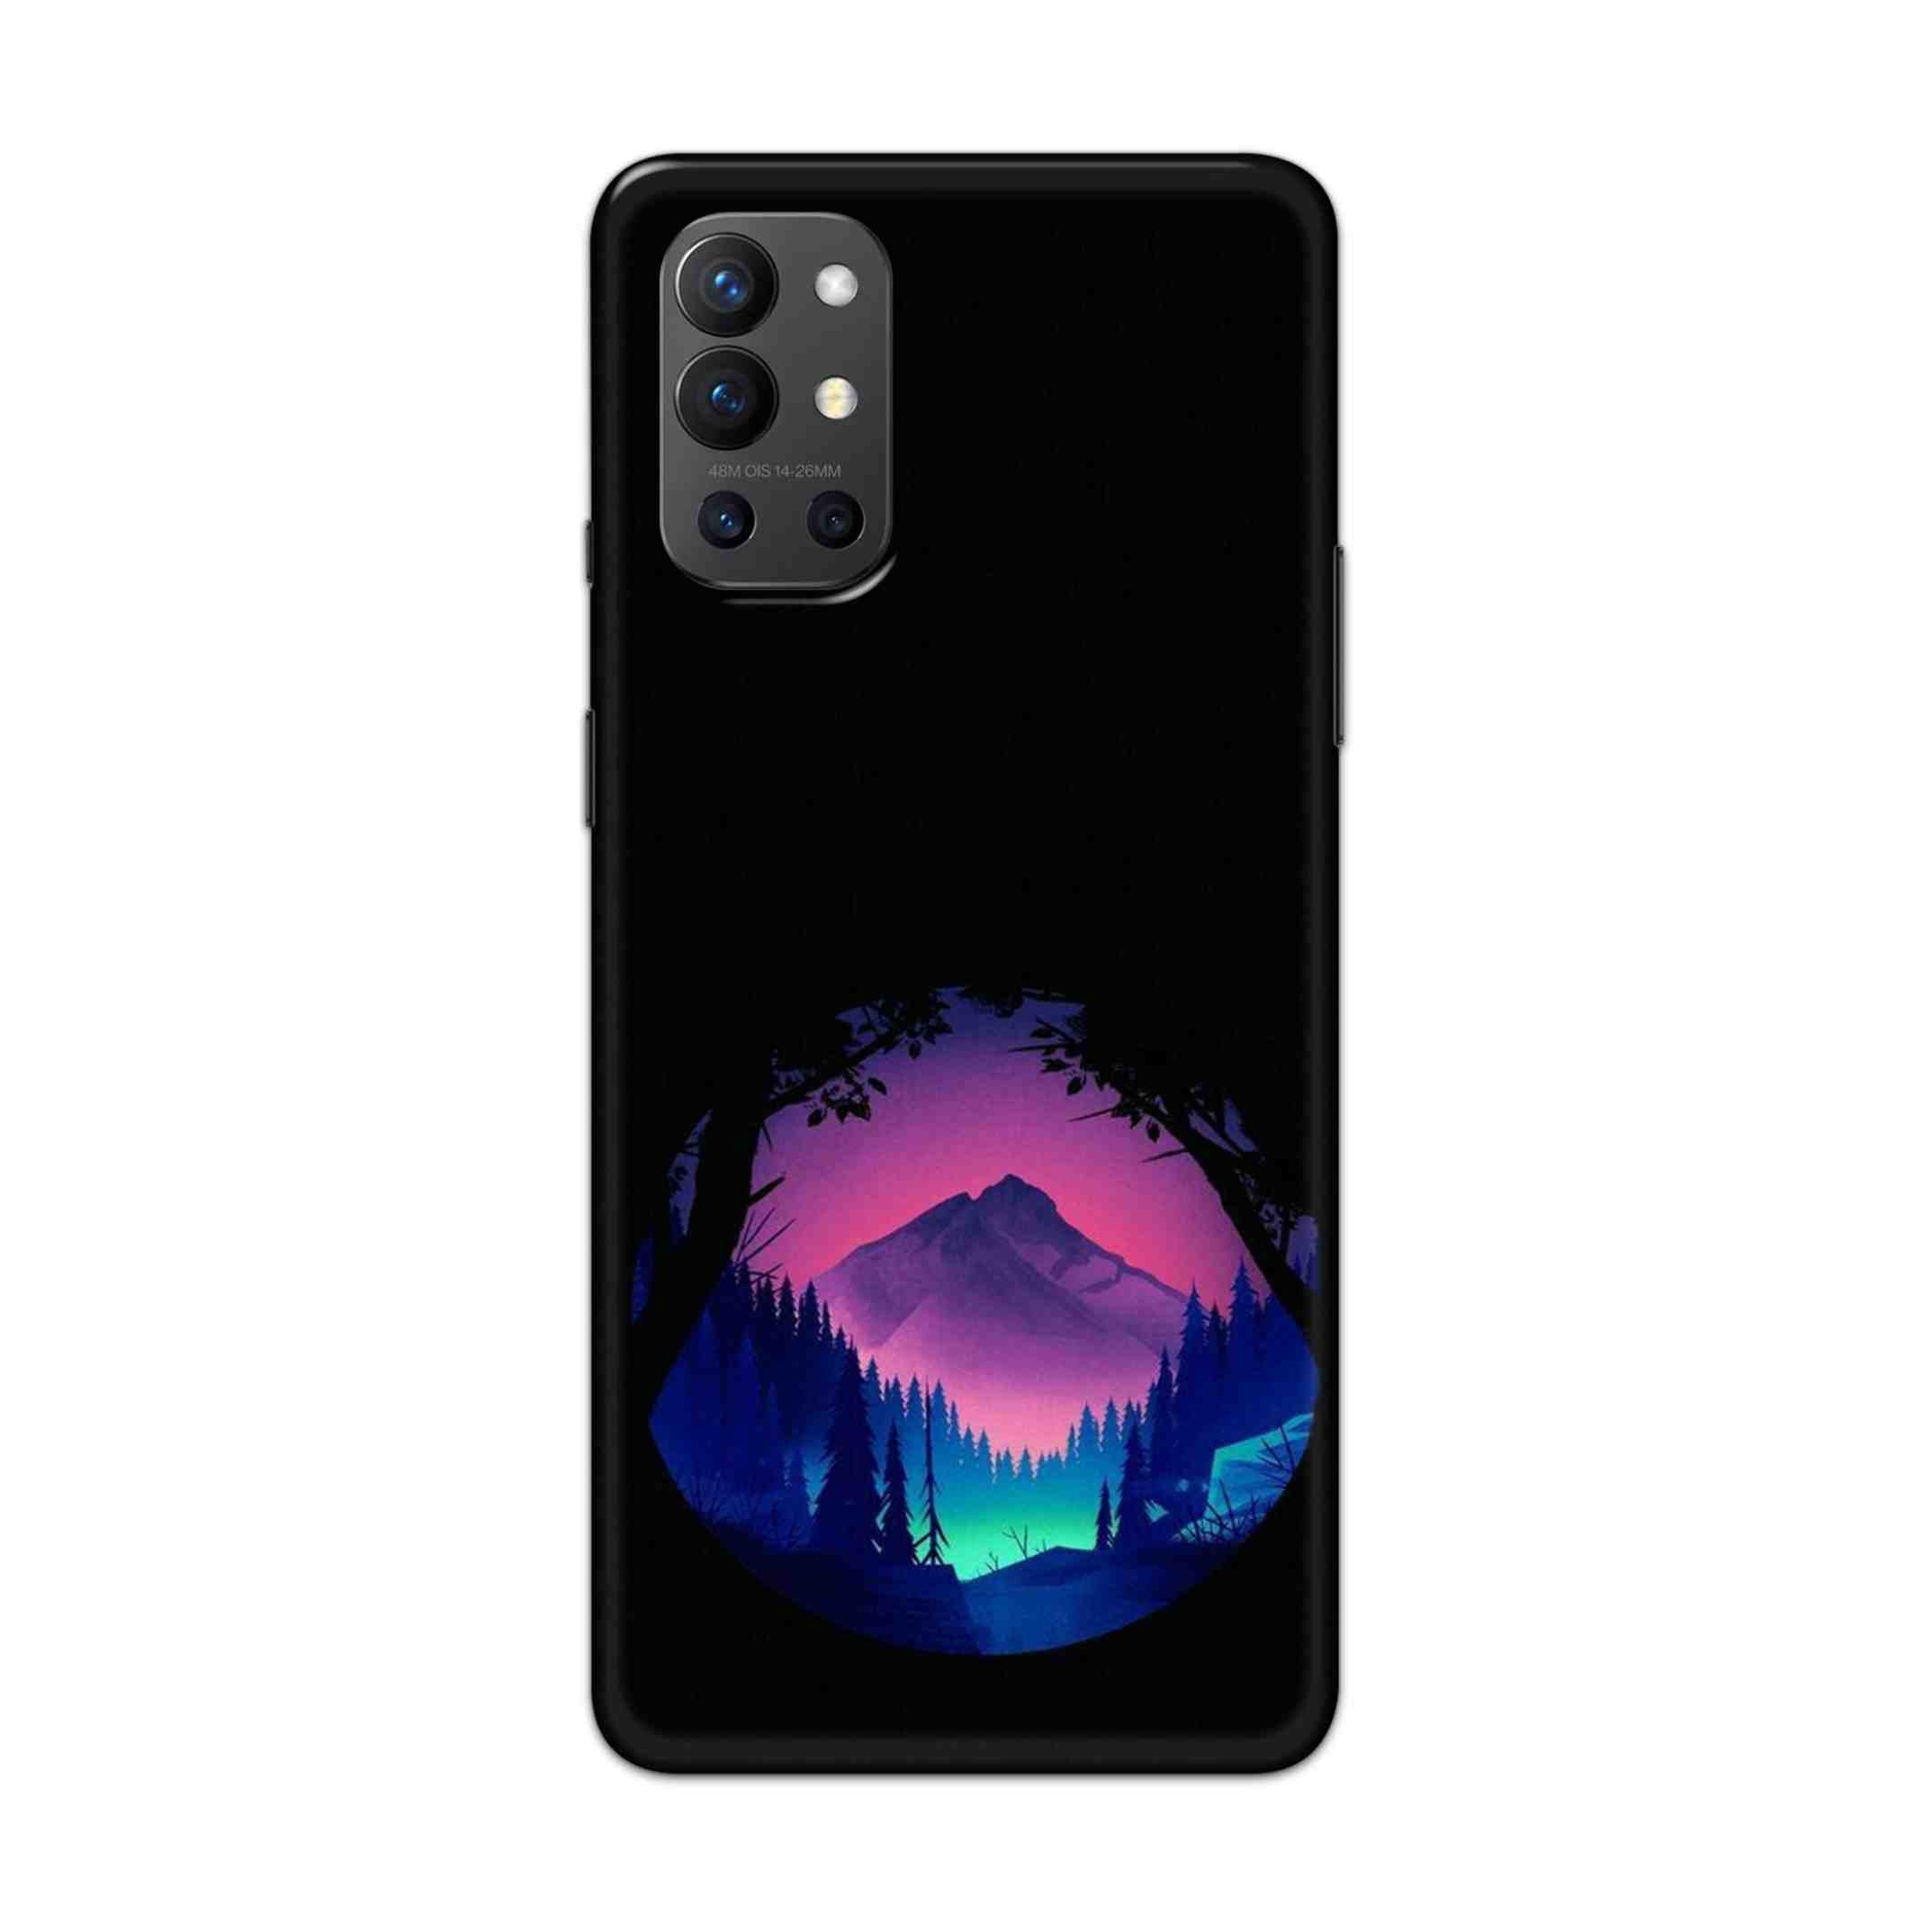 Buy Neon Tables Hard Back Mobile Phone Case Cover For OnePlus 9R / 8T Online